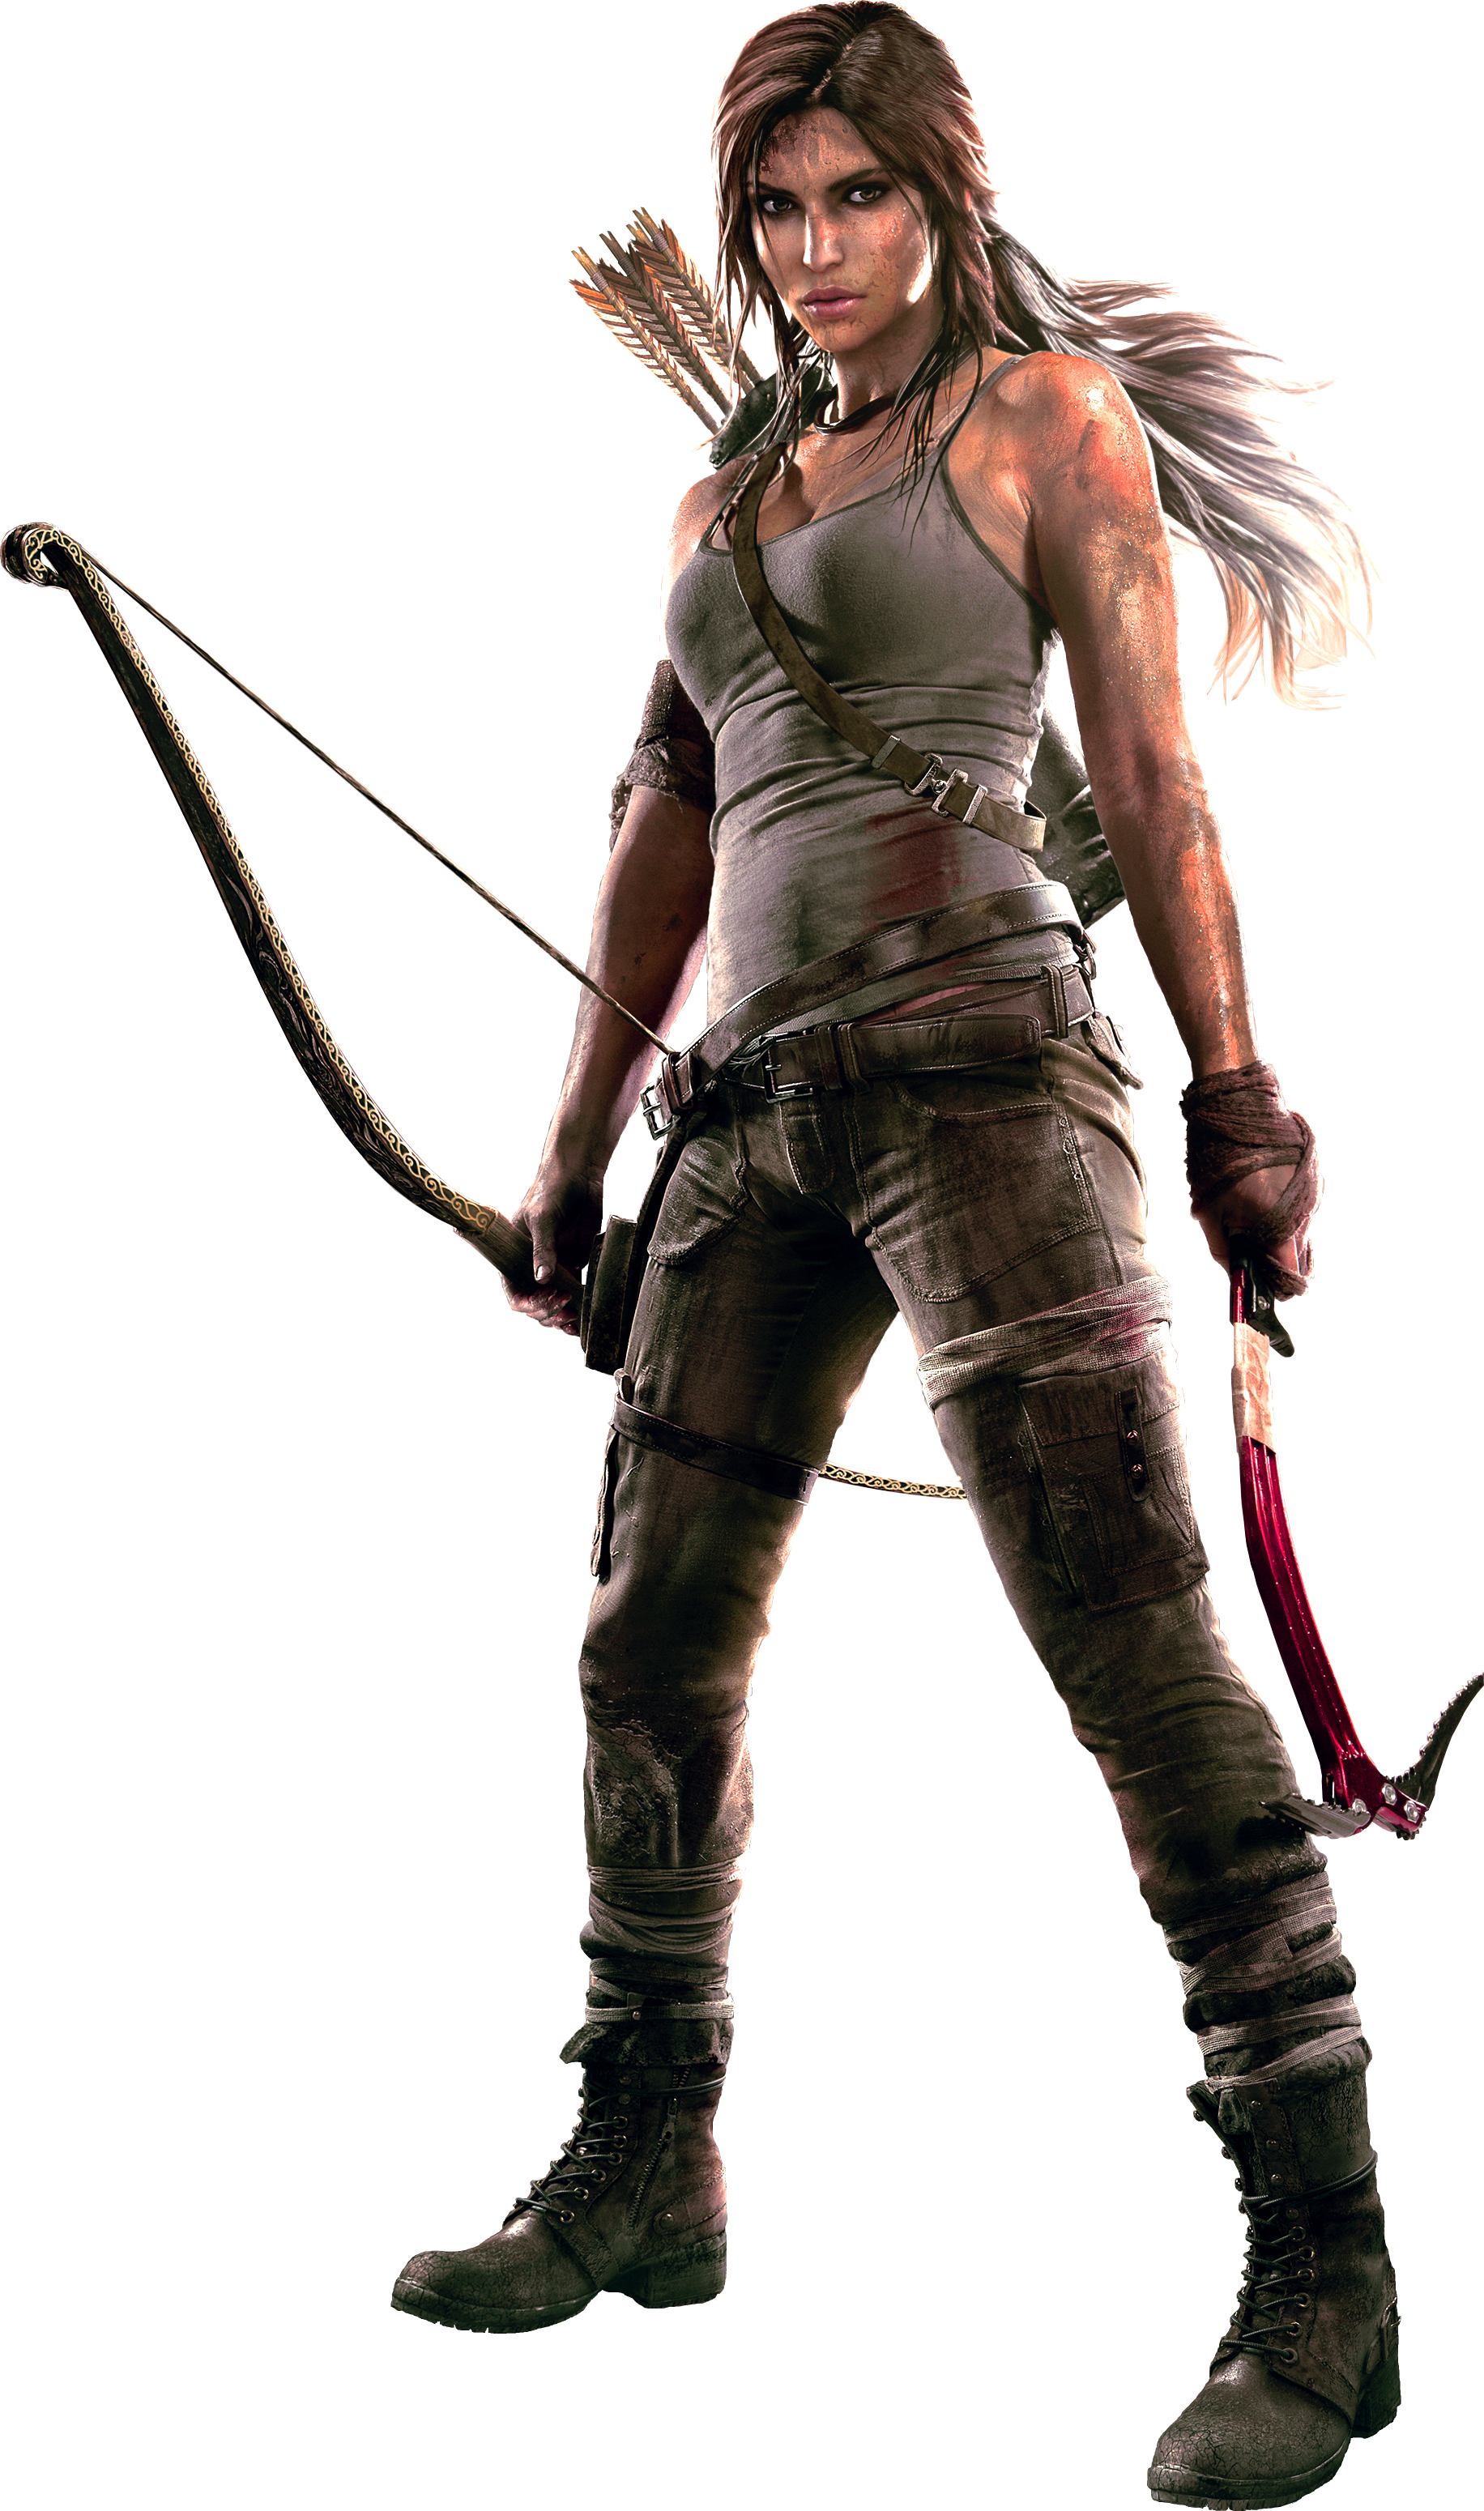 Tomb Rider PNG